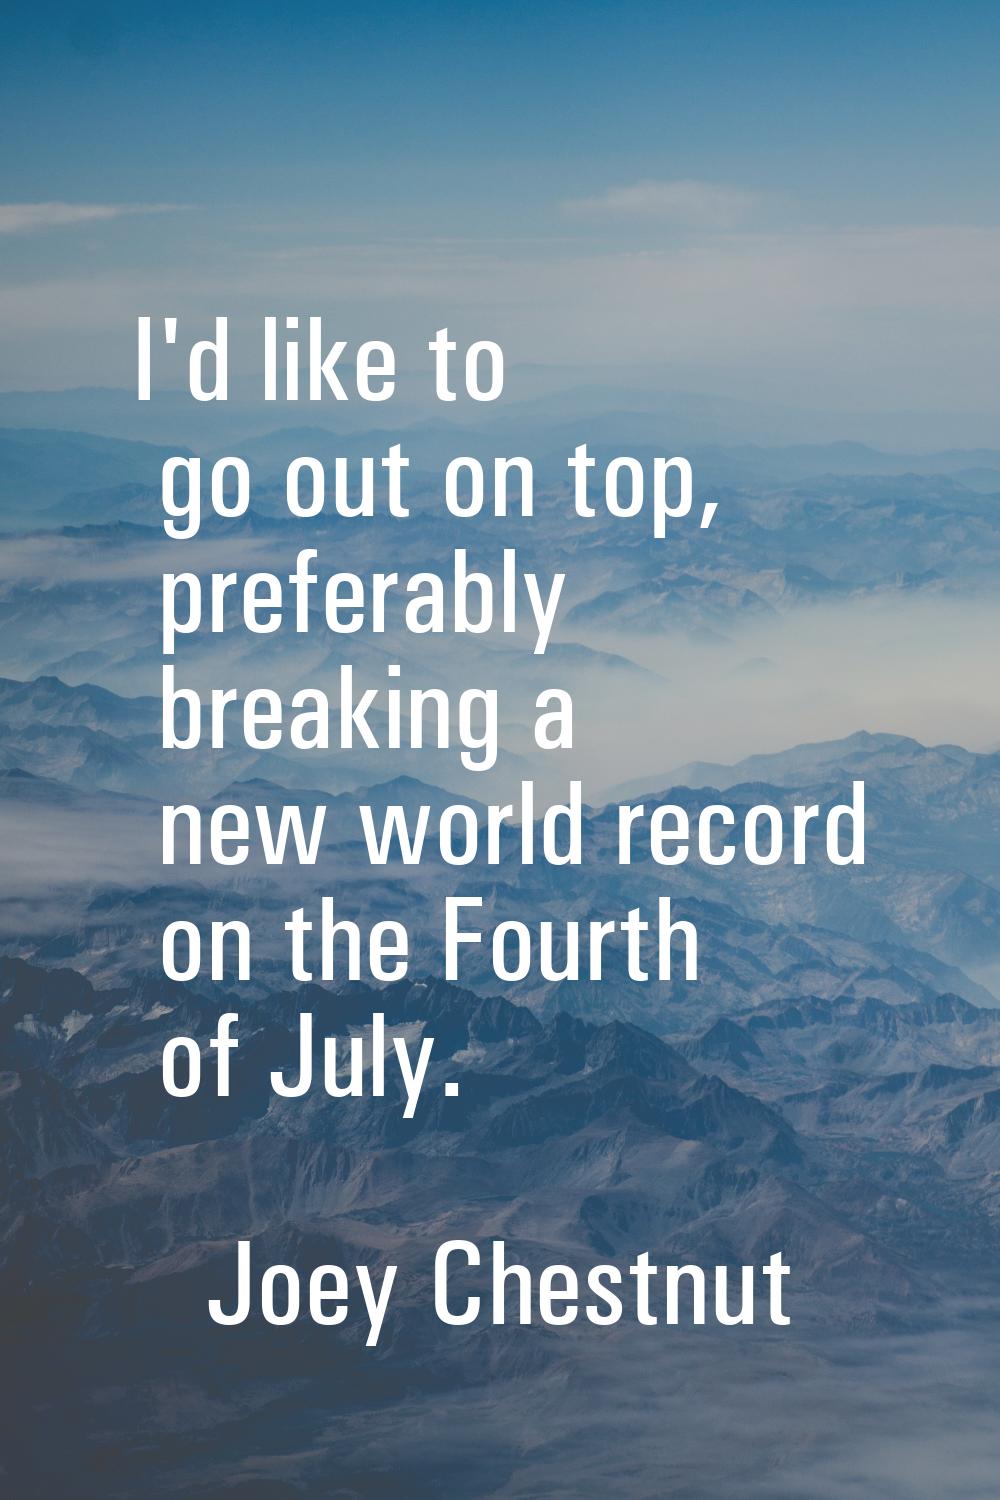 I'd like to go out on top, preferably breaking a new world record on the Fourth of July.